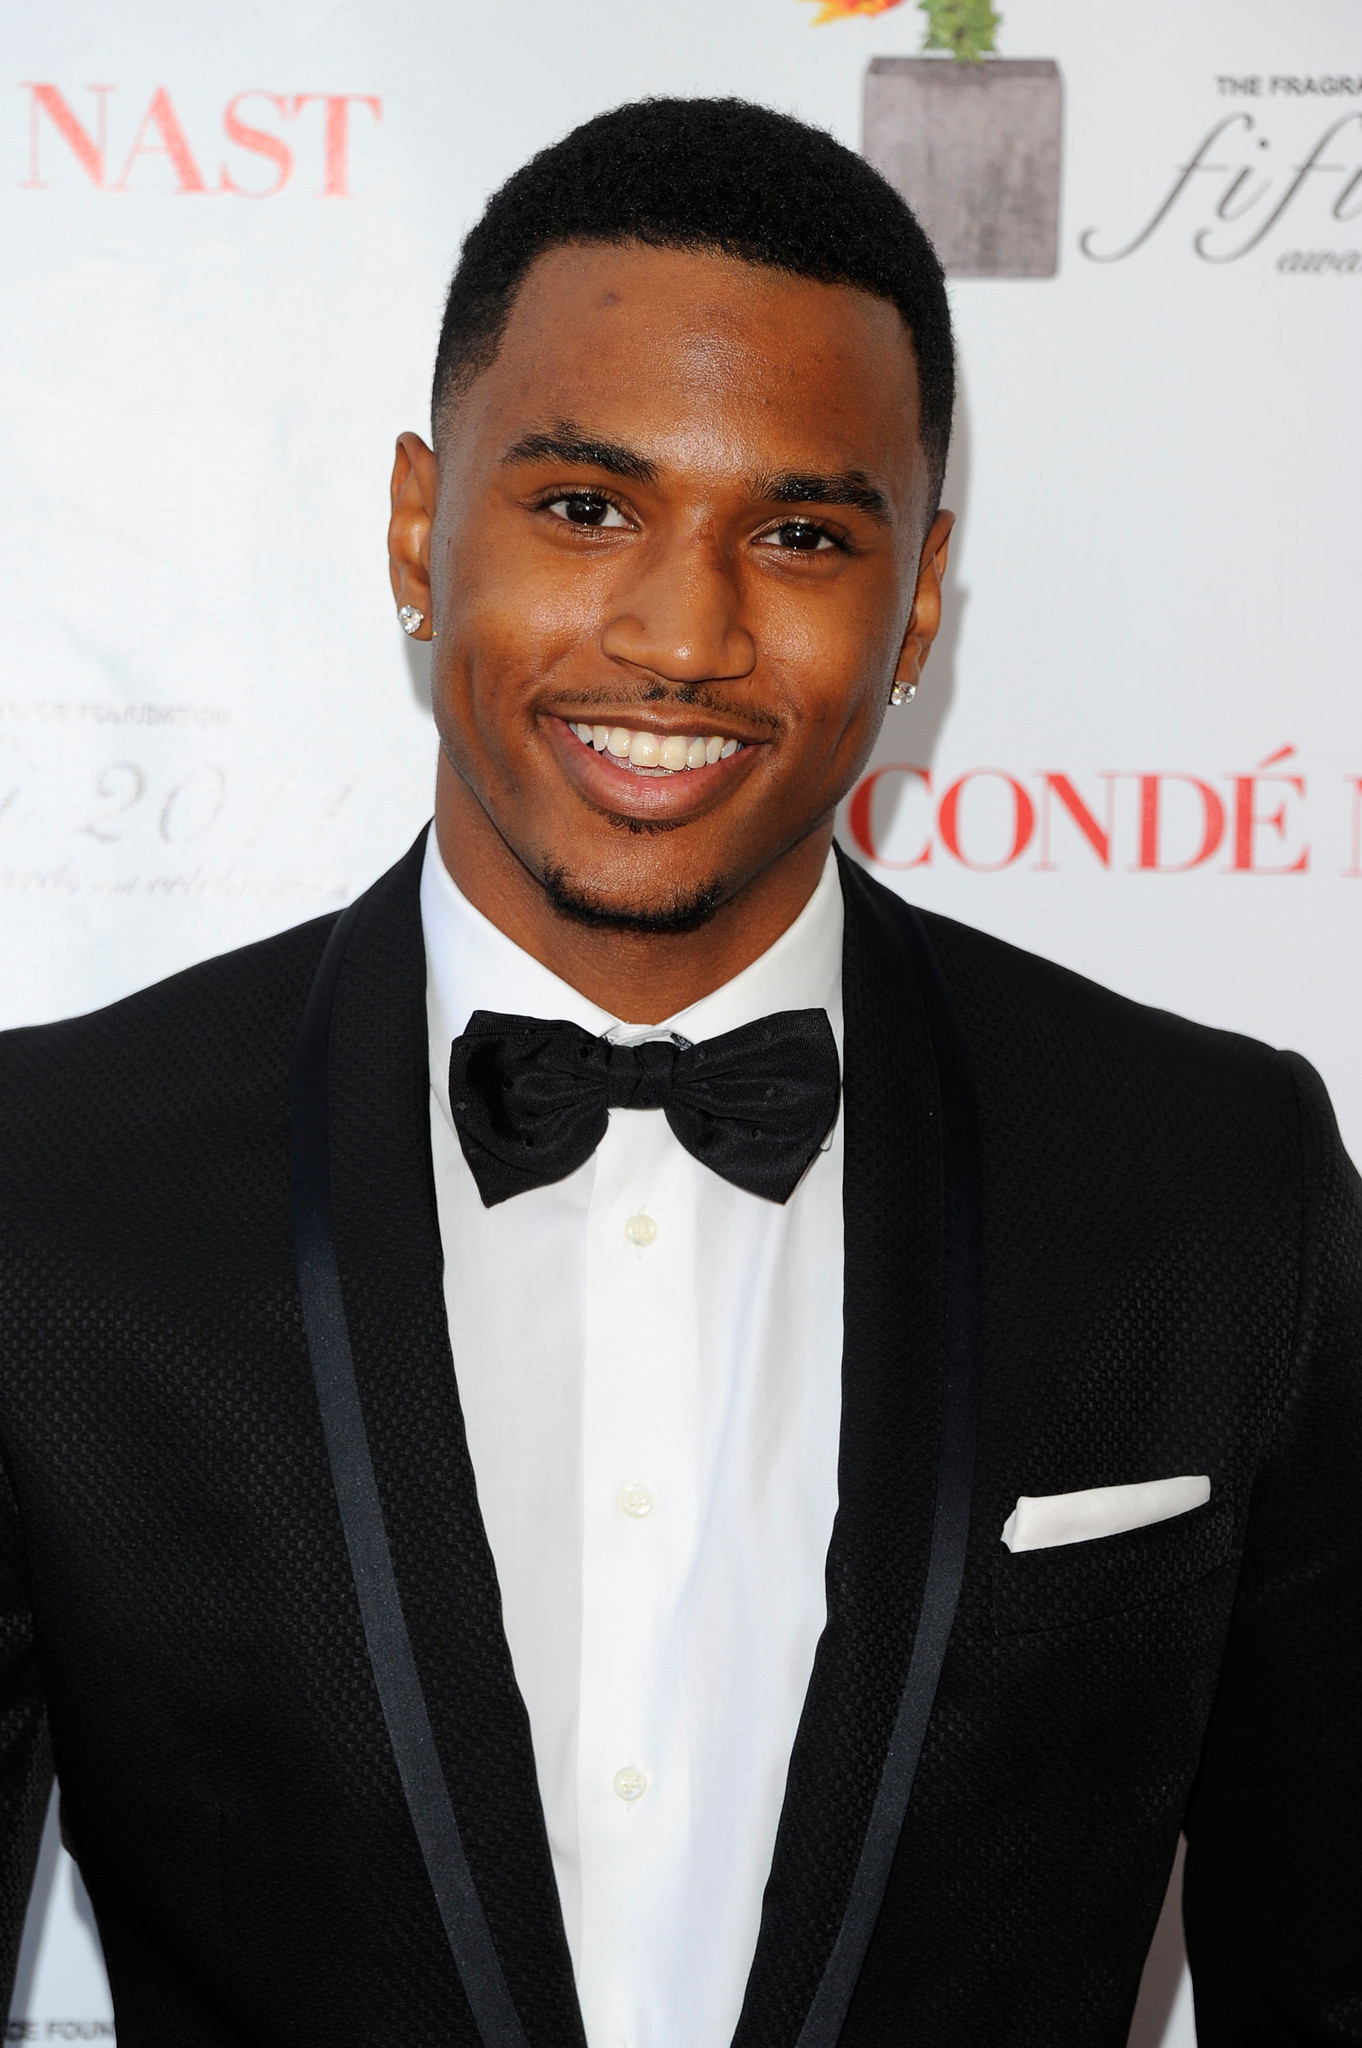 Trey Songz Wallpapers 66 images